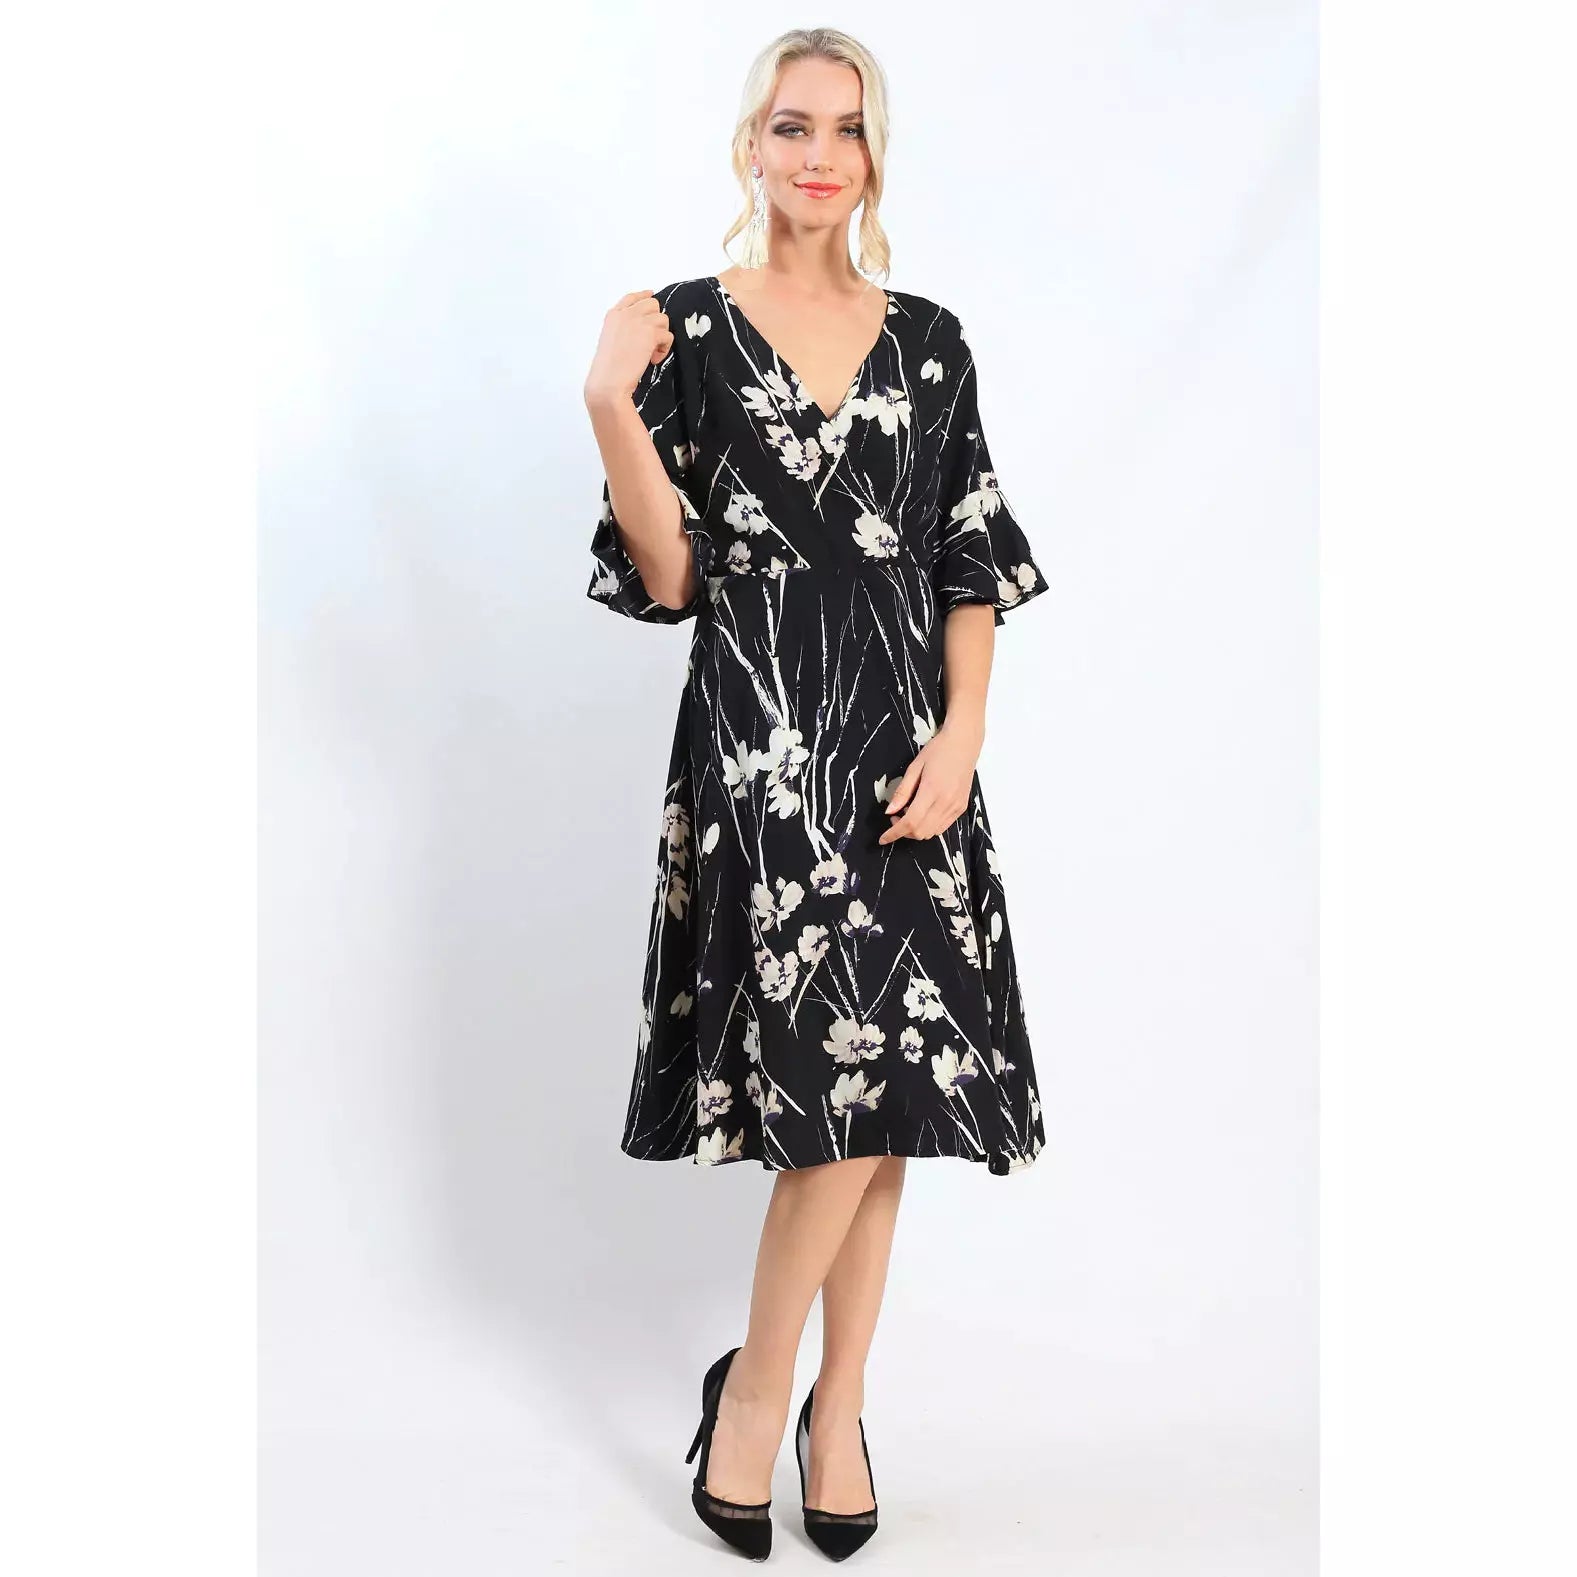 Teaberry - Floral Wrap Top Dress